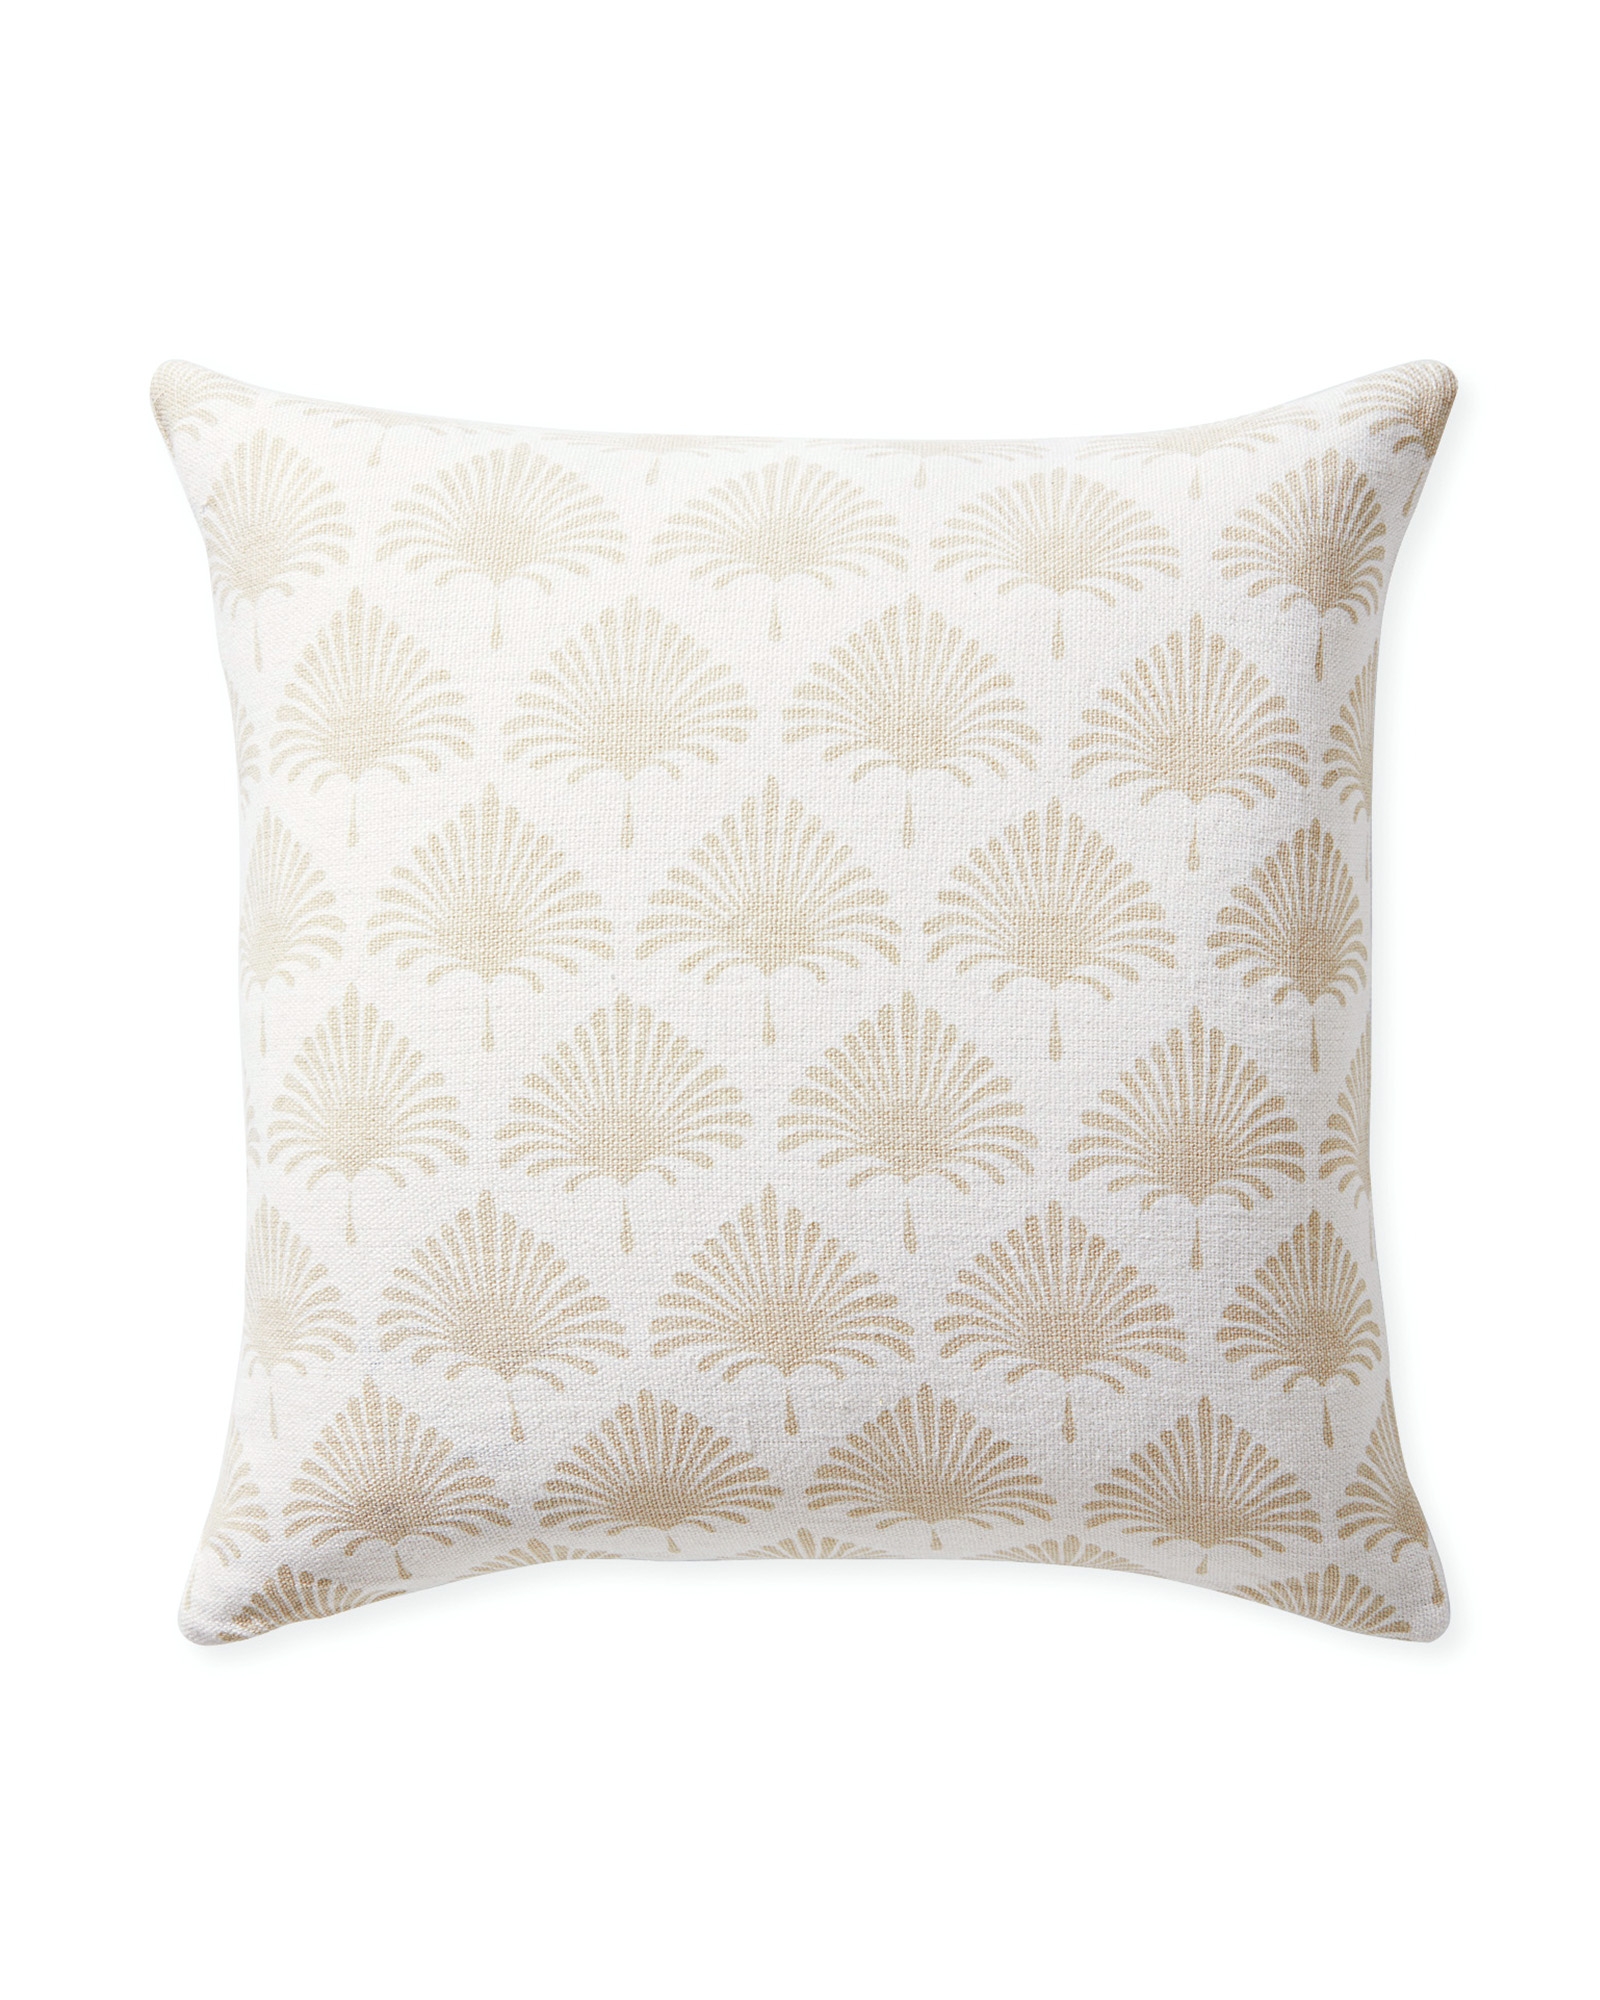 Paloma Pillow Cover, Sand - 22x22 - No Insert - Image 0